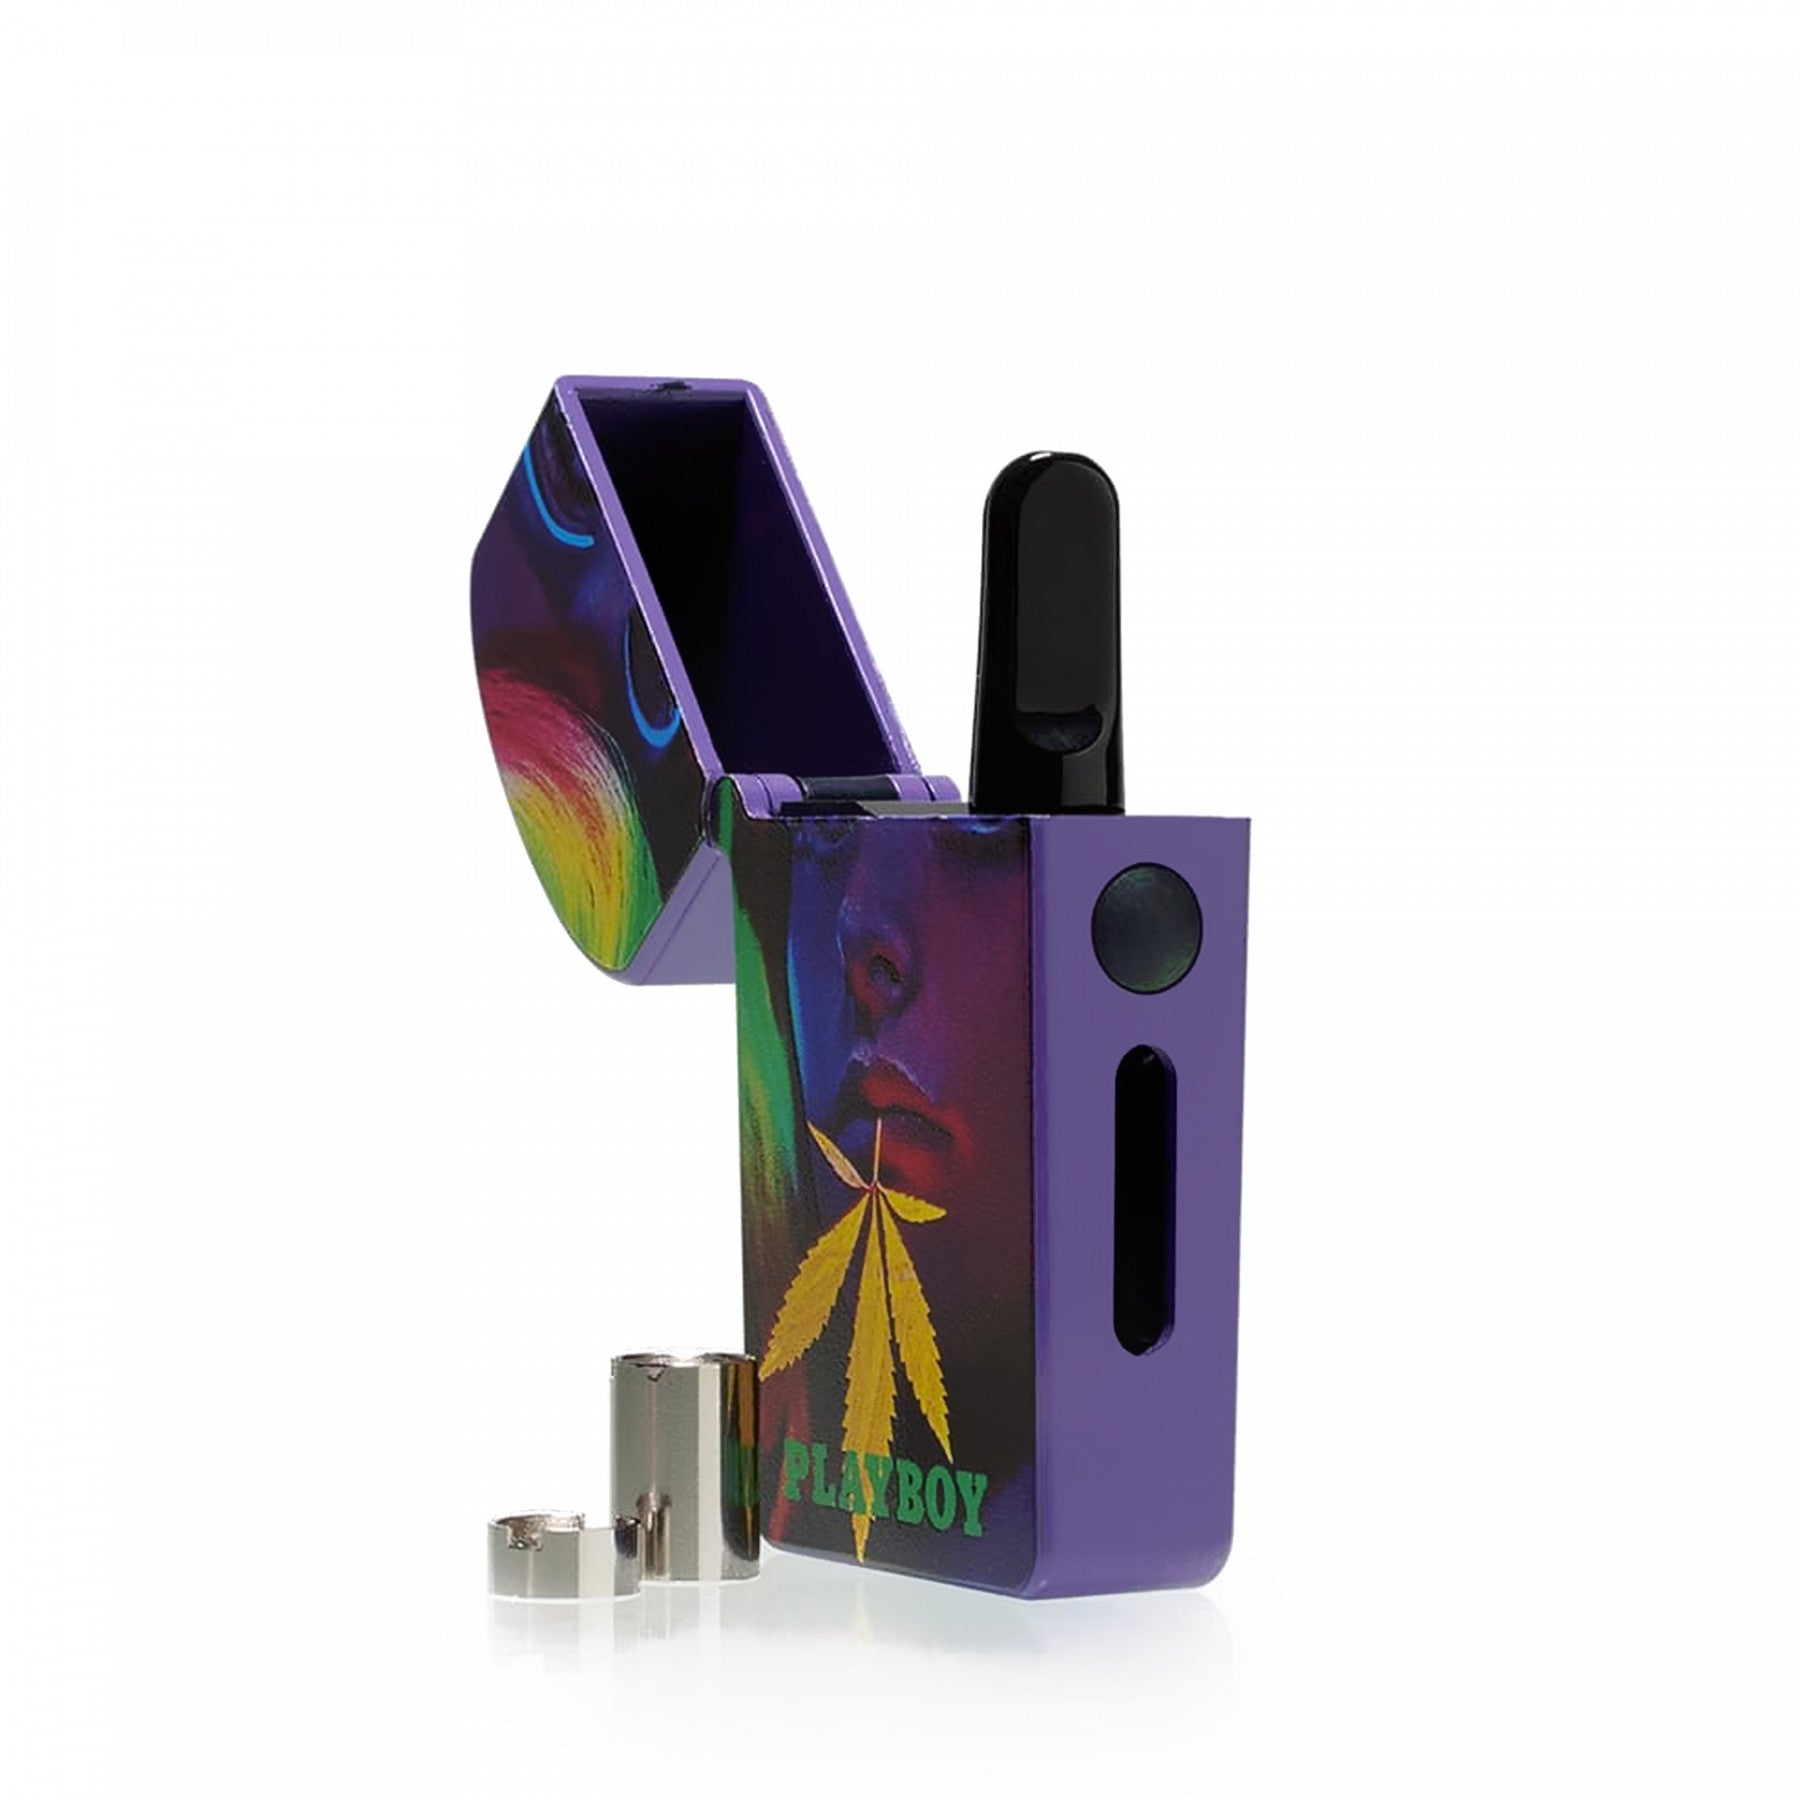 Playboy X Verb Vaporizer for 510 Cartridges.  Girl with Gold Leaf Battery.